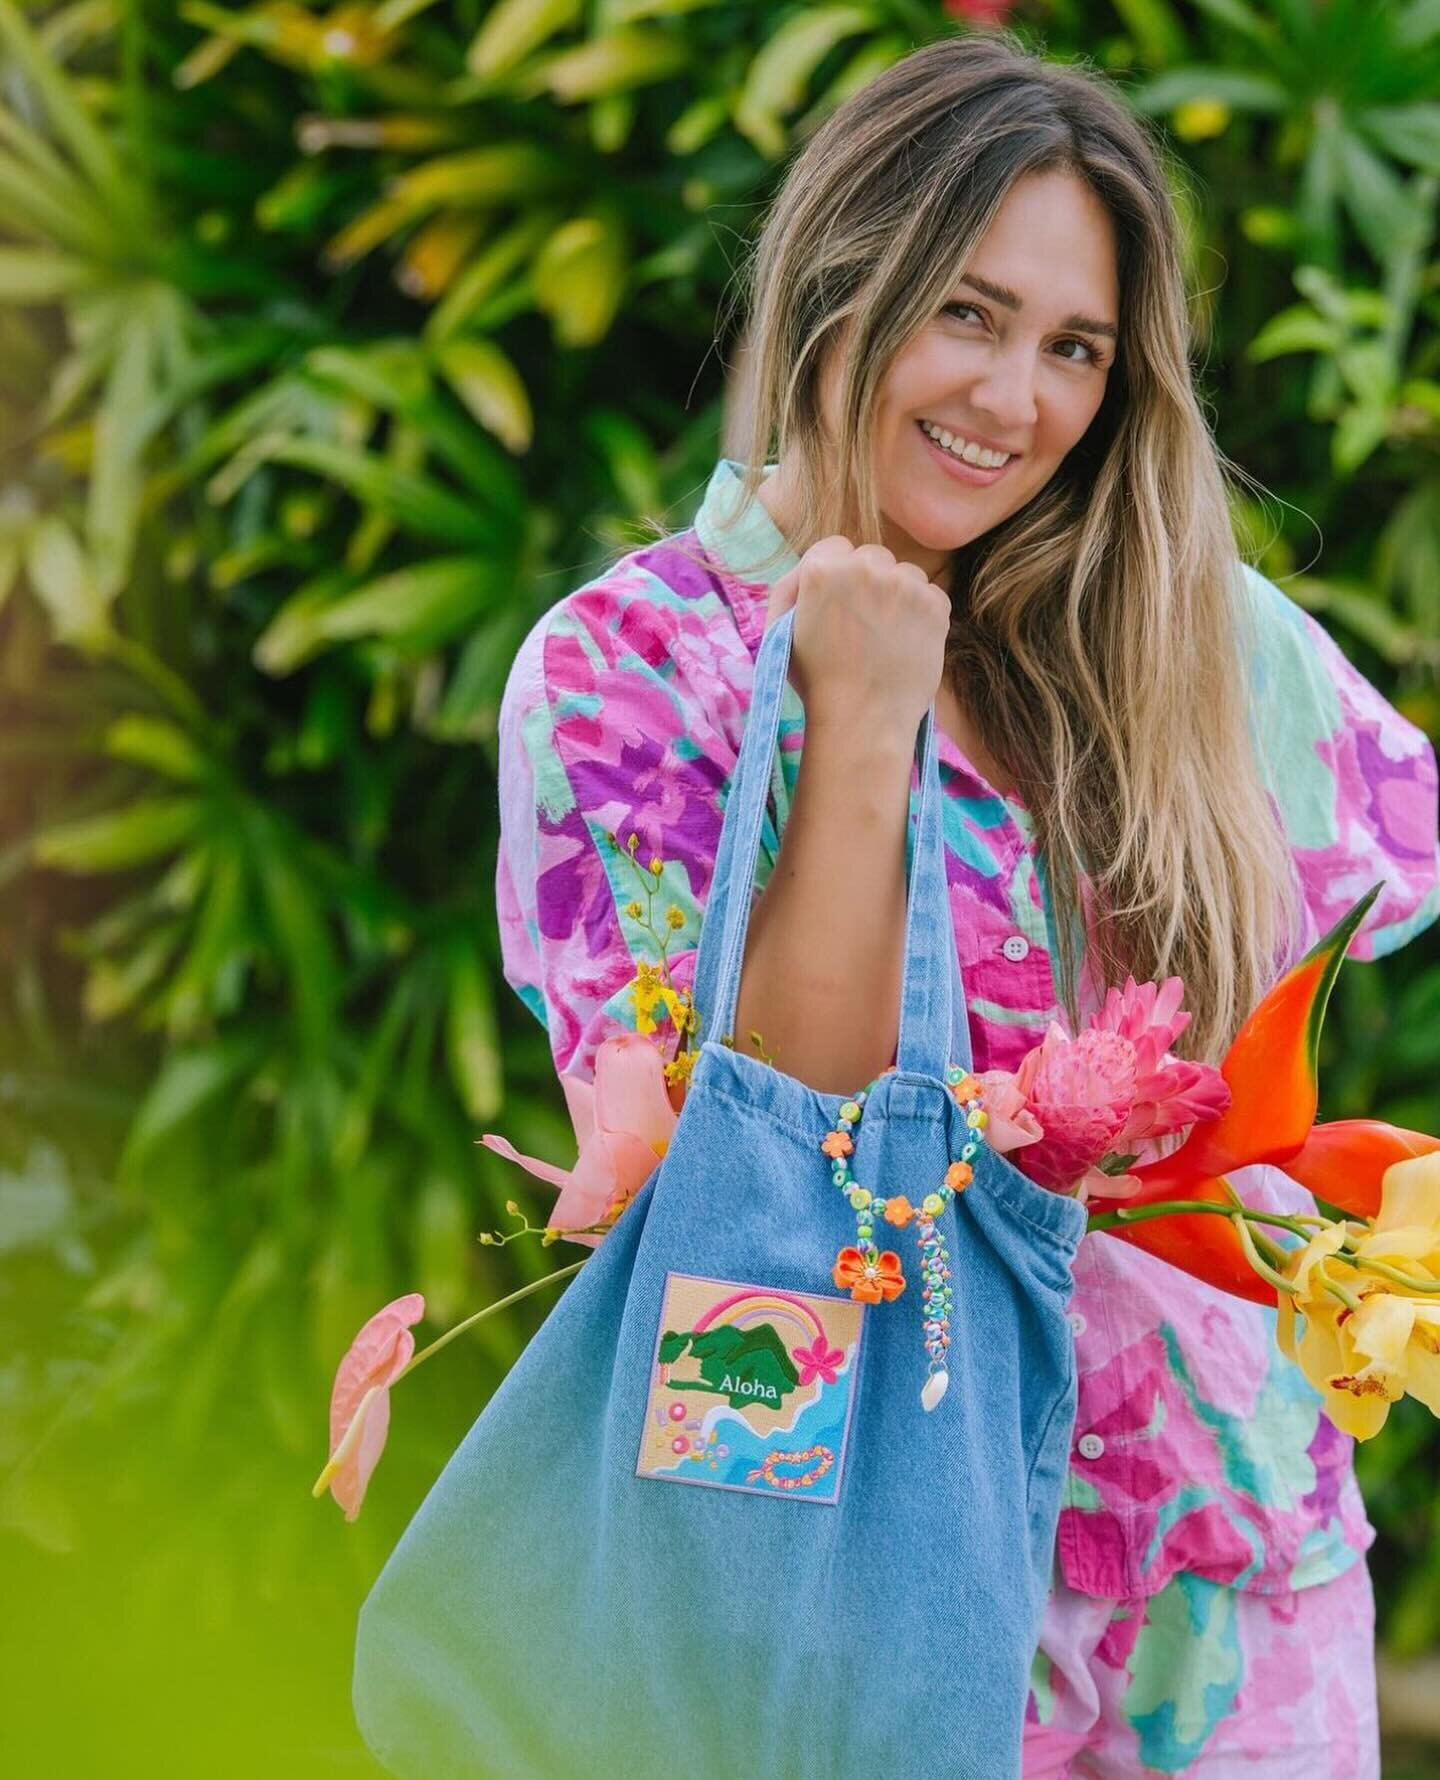 Need a little something to brighten up your day? Try a pop of color from @kailua.beads 🌈☀️

Next Saturday, don&rsquo;t miss their pop-up at our Hawaii Kai Market and shop their eye-catching beading kits and more!

📍Saturday 4/6&bull; @ Koko Head El